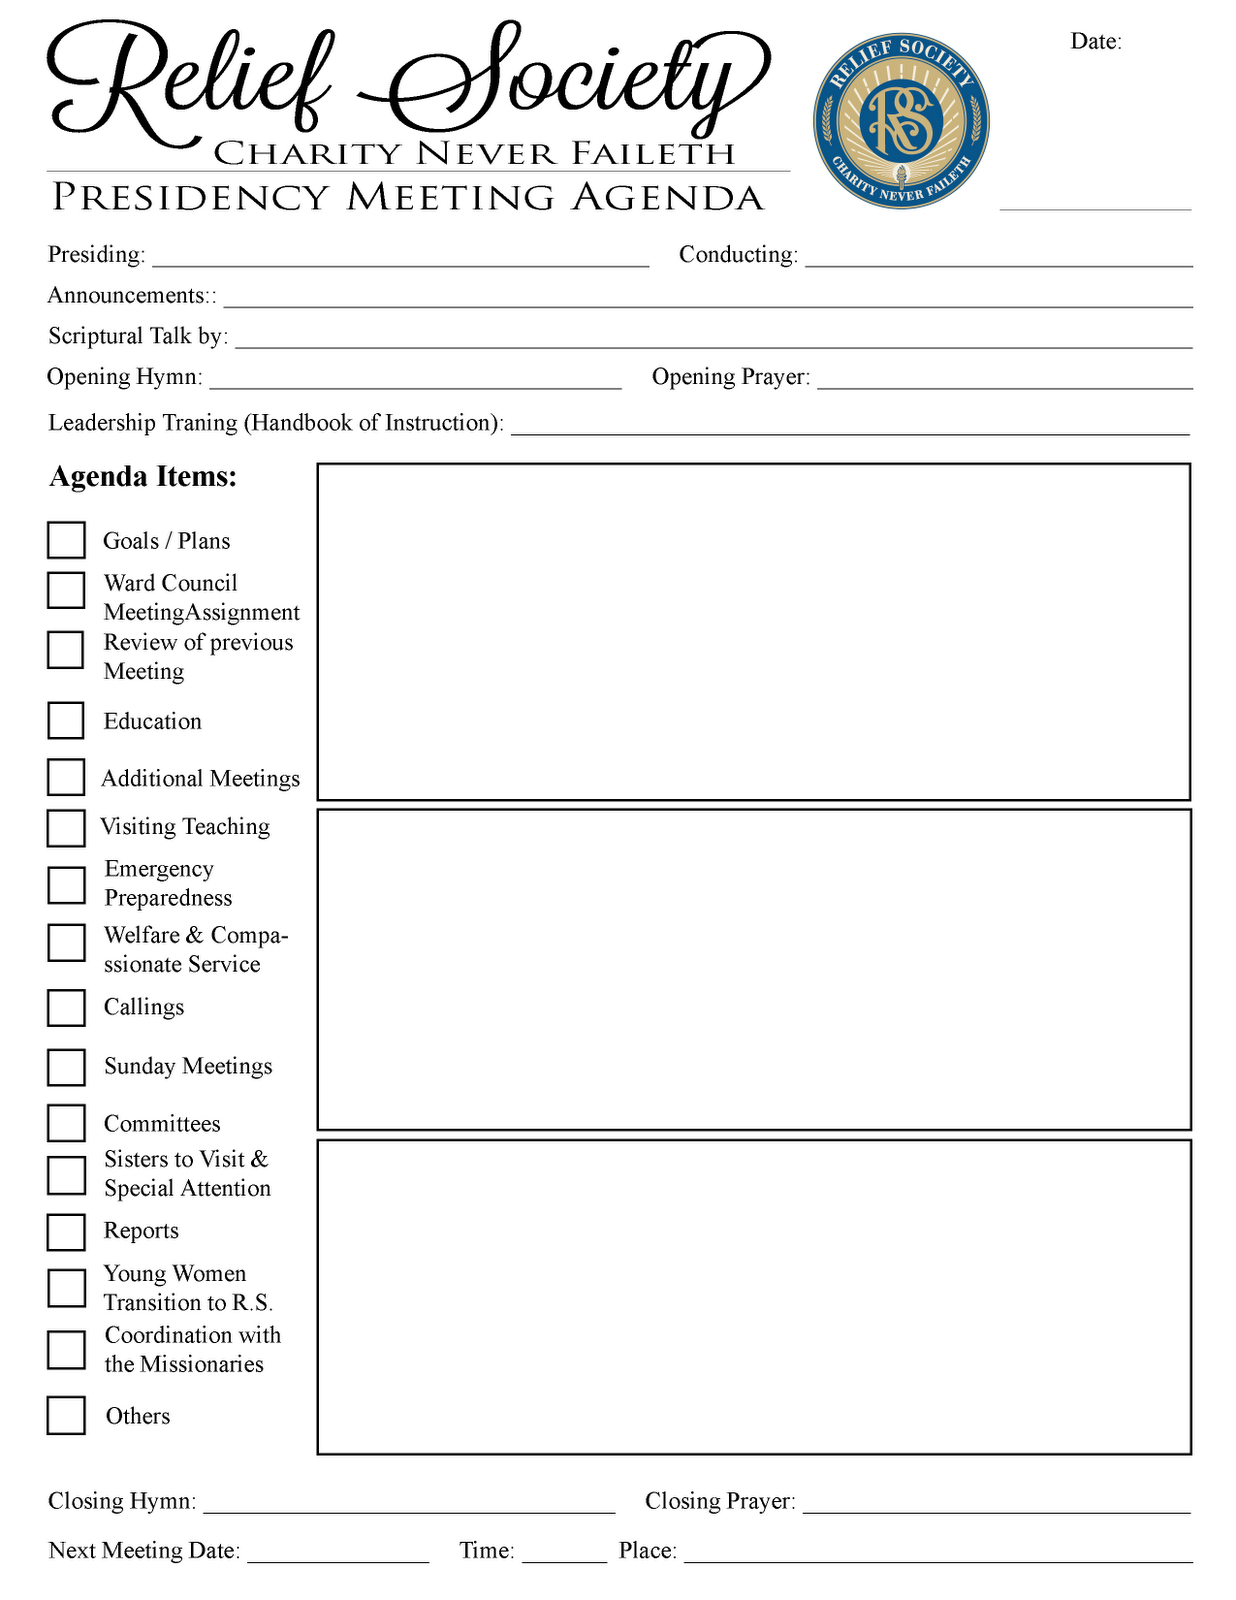 Muahrilou Rs Presidency Meeting Agenda Relief Society intended for measurements 1236 X 1600